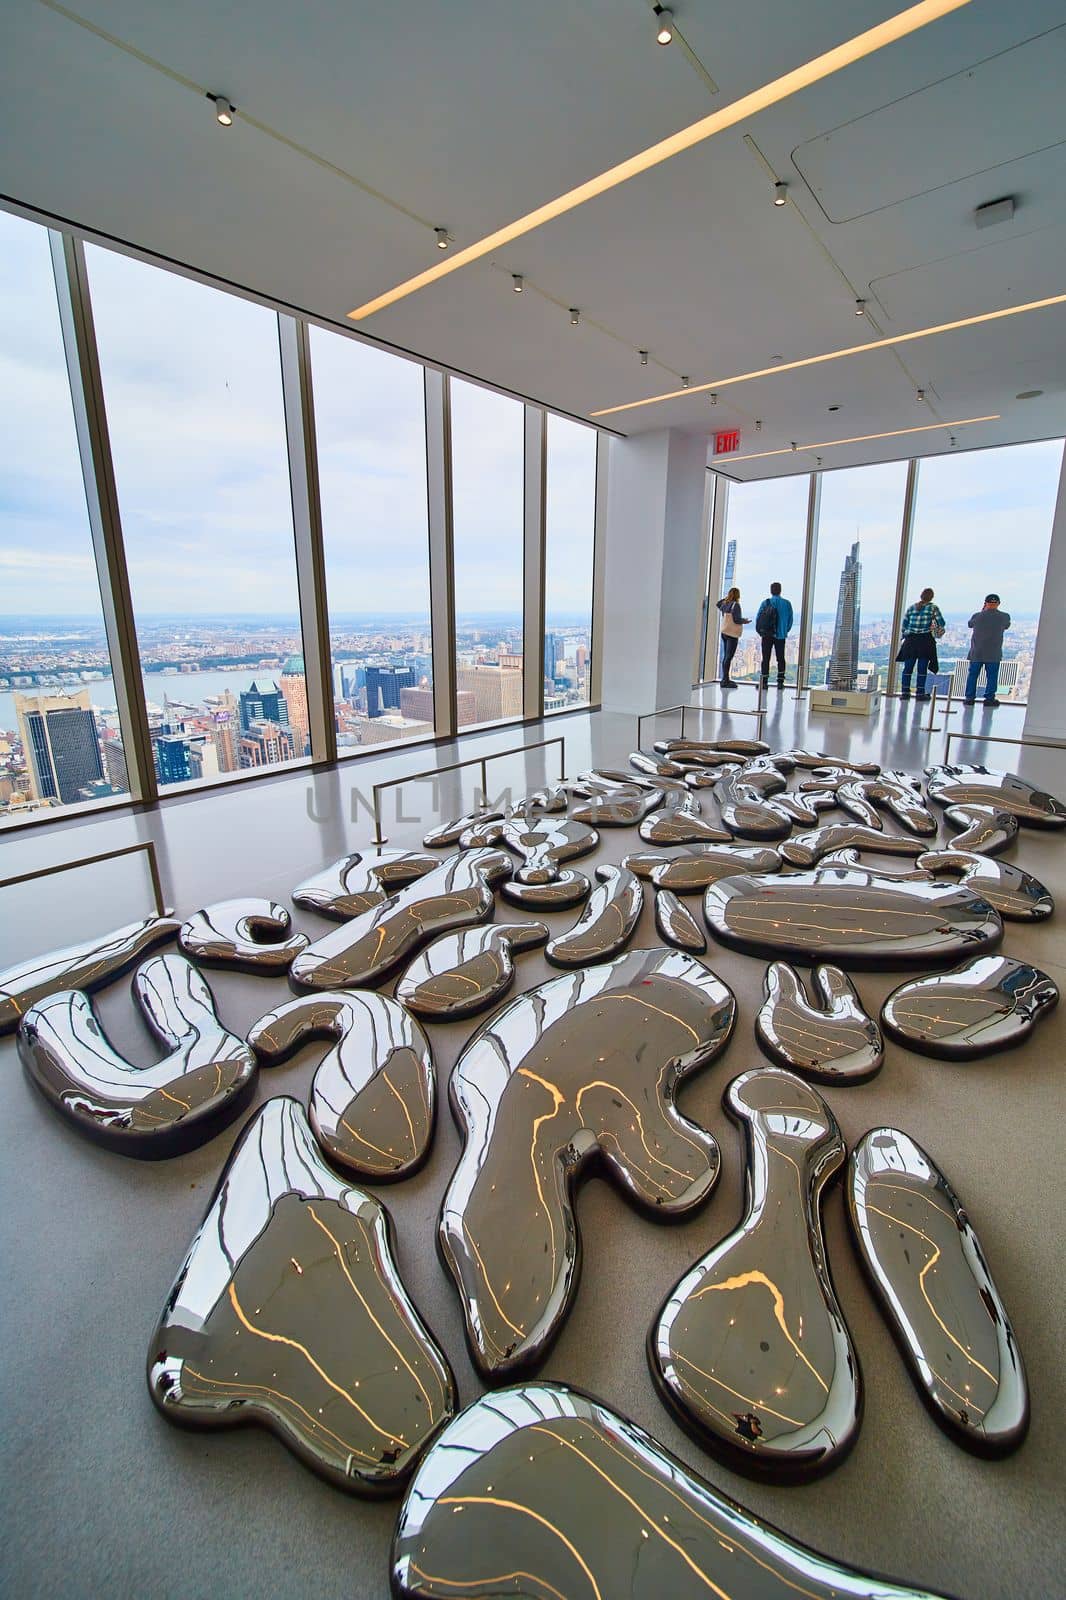 Image of Mirror metal melted abstract shapes cover ground in exhibit overlooking New York City from above